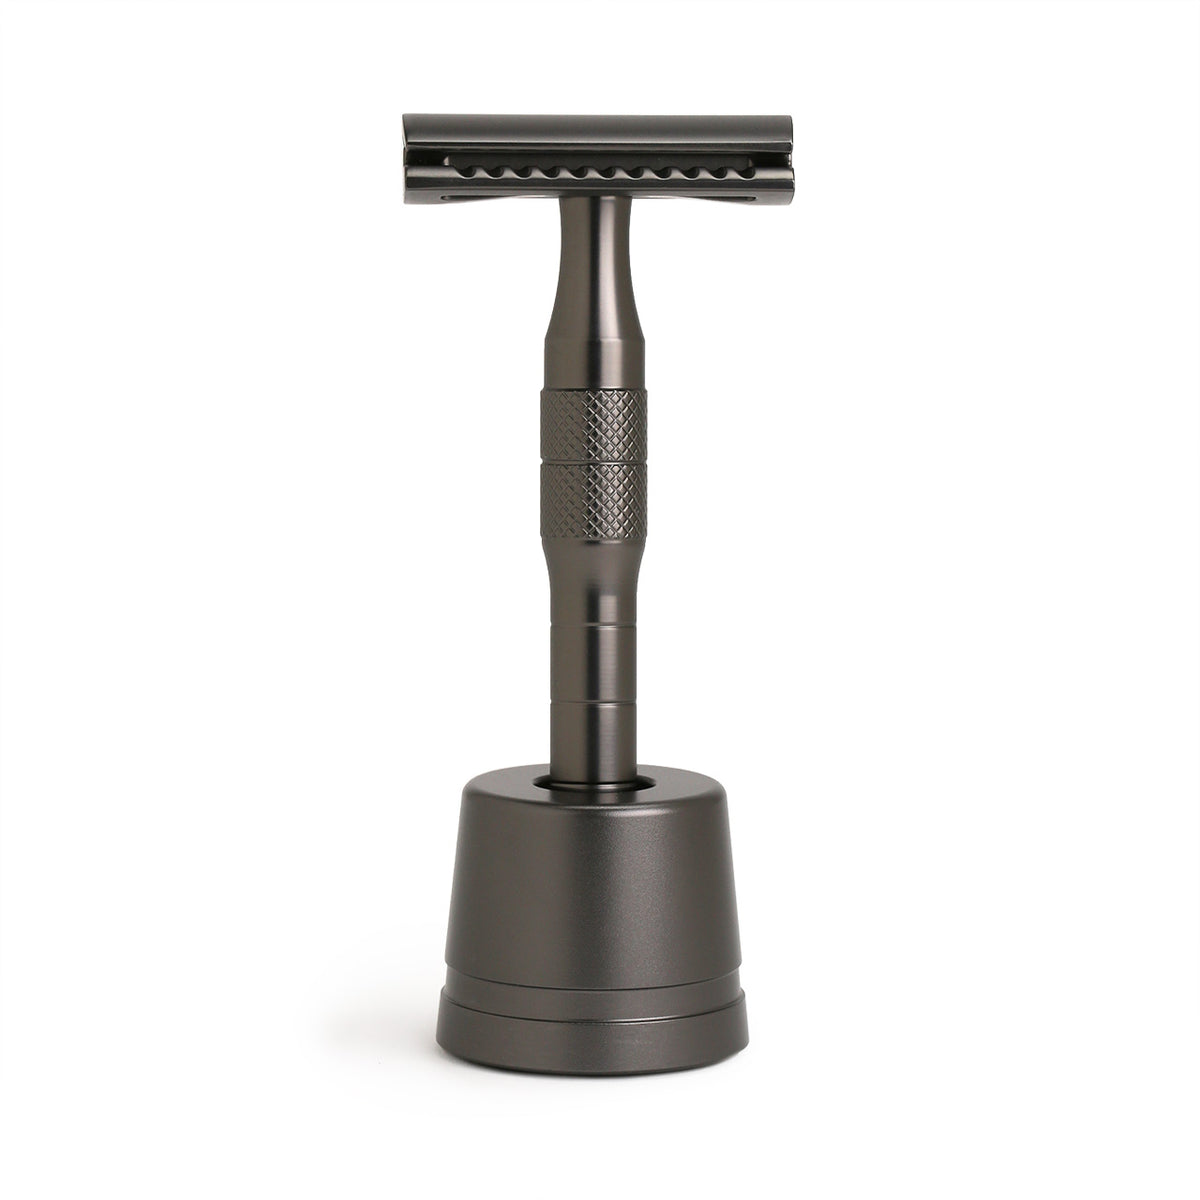 Daily Shaver Safety Razor and stand with charcoal finish